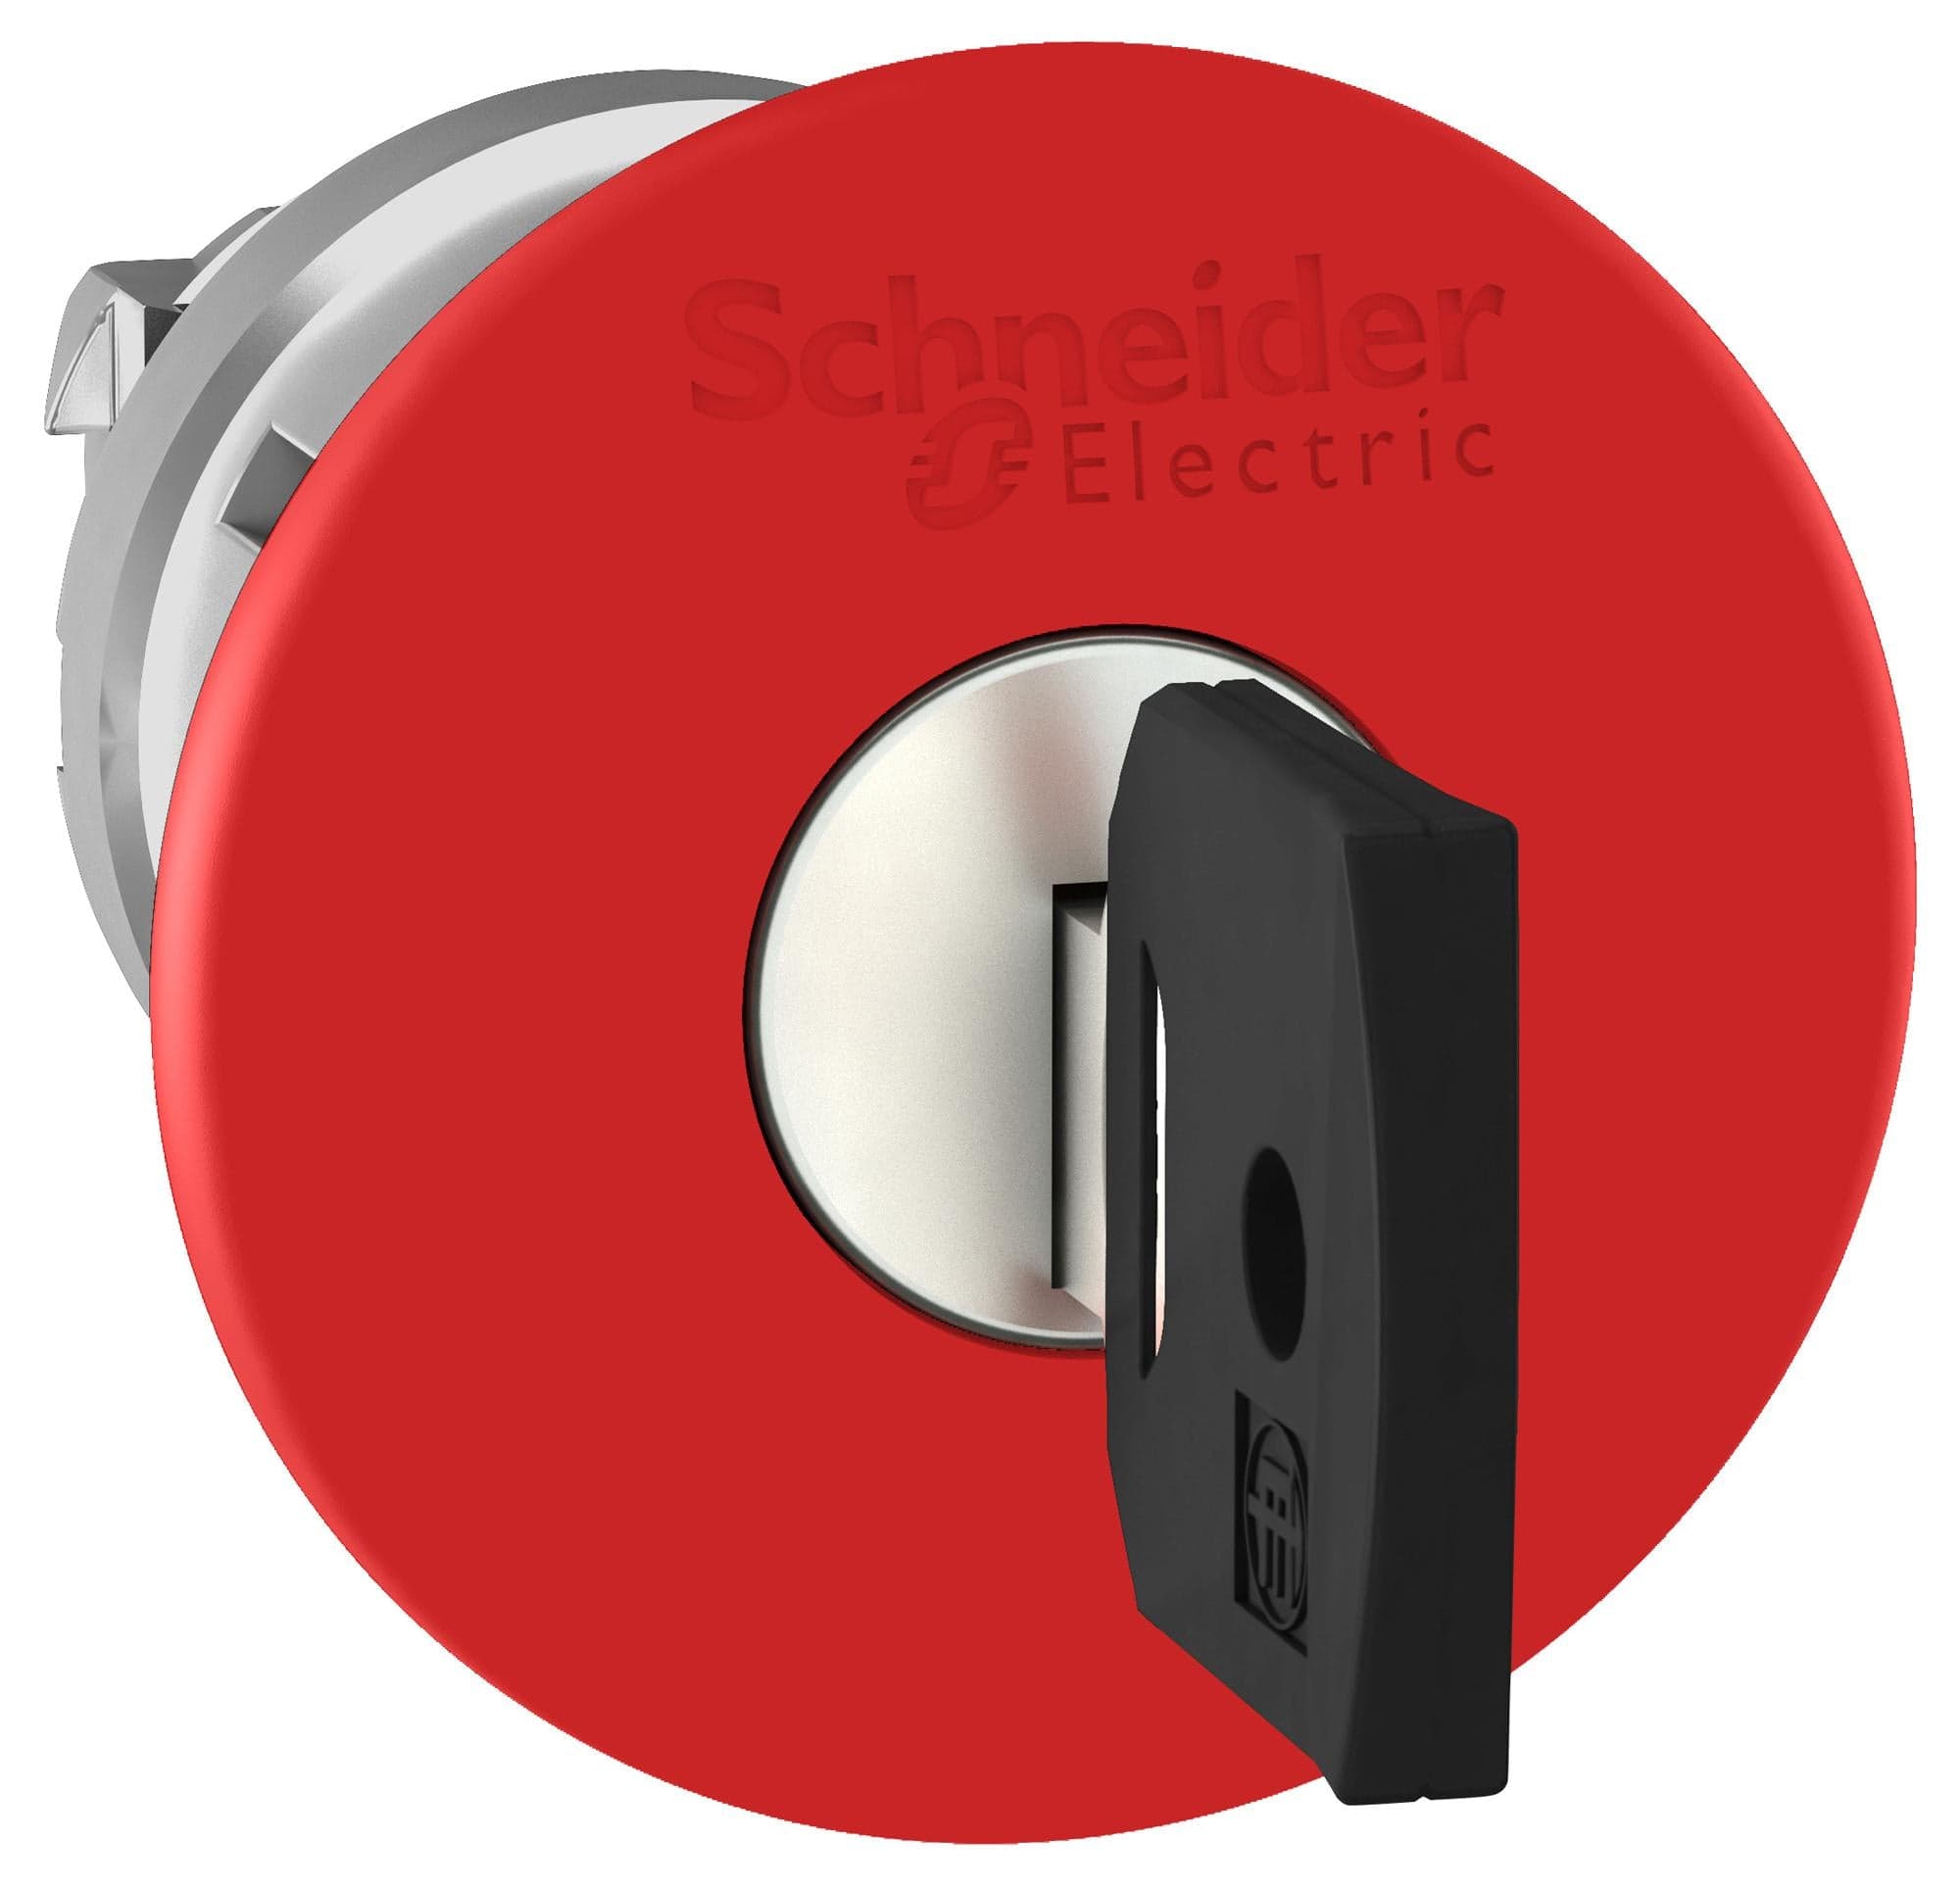 SCHNEIDER ELECTRIC Actuators ZB4BS94412 SWITCH ACTUATOR, RED, KEY RELEASE E-STOP SCHNEIDER ELECTRIC 3109516 ZB4BS94412